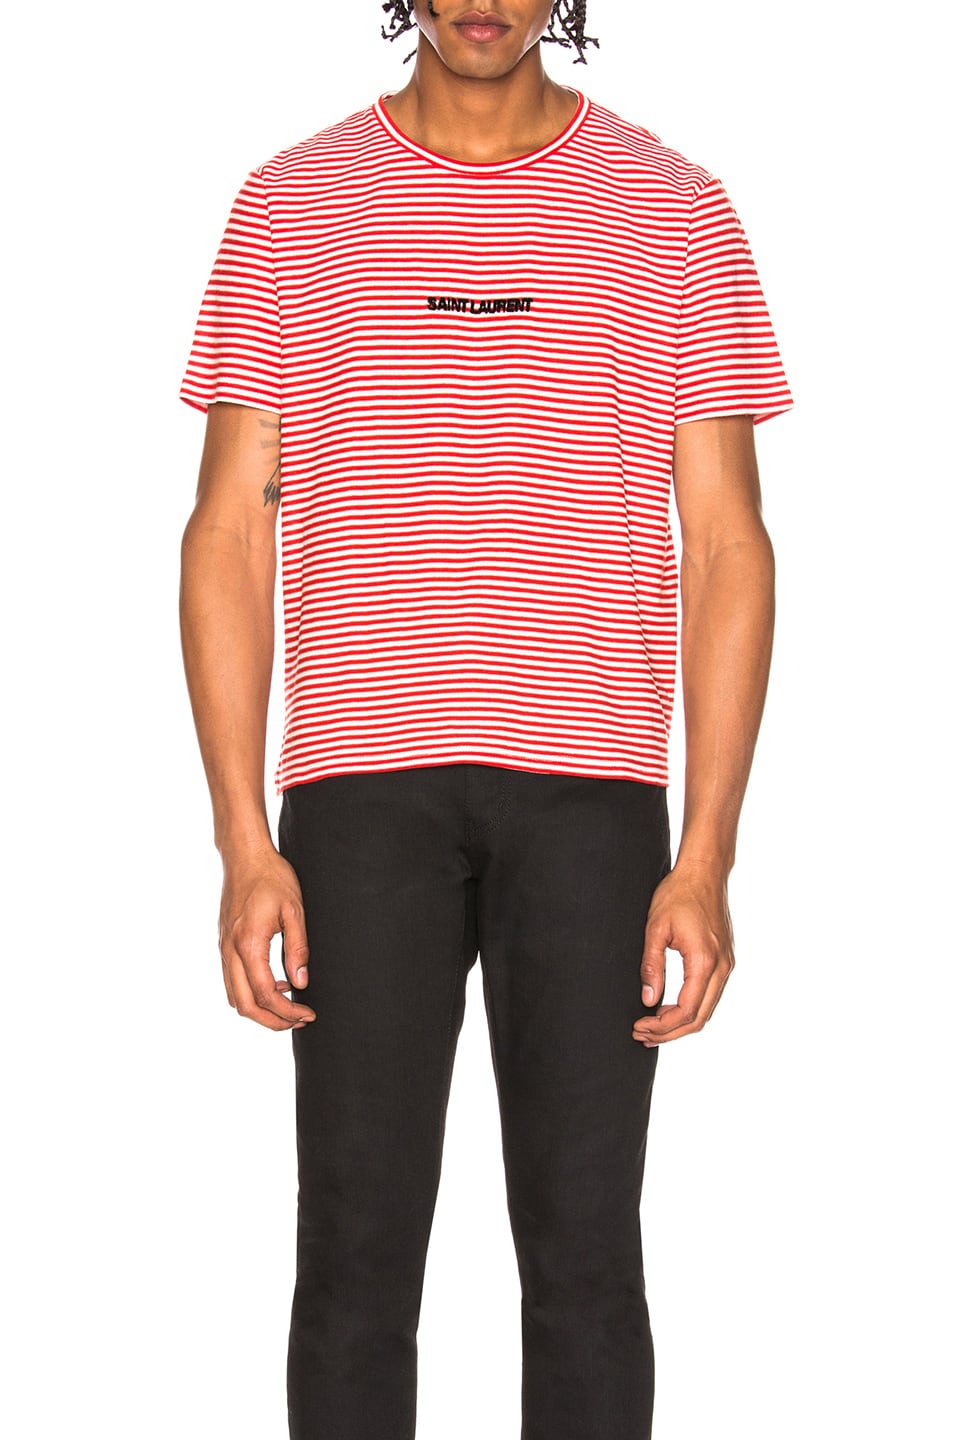 Image 1 of Saint Laurent Striped Logo Tee in Red & White